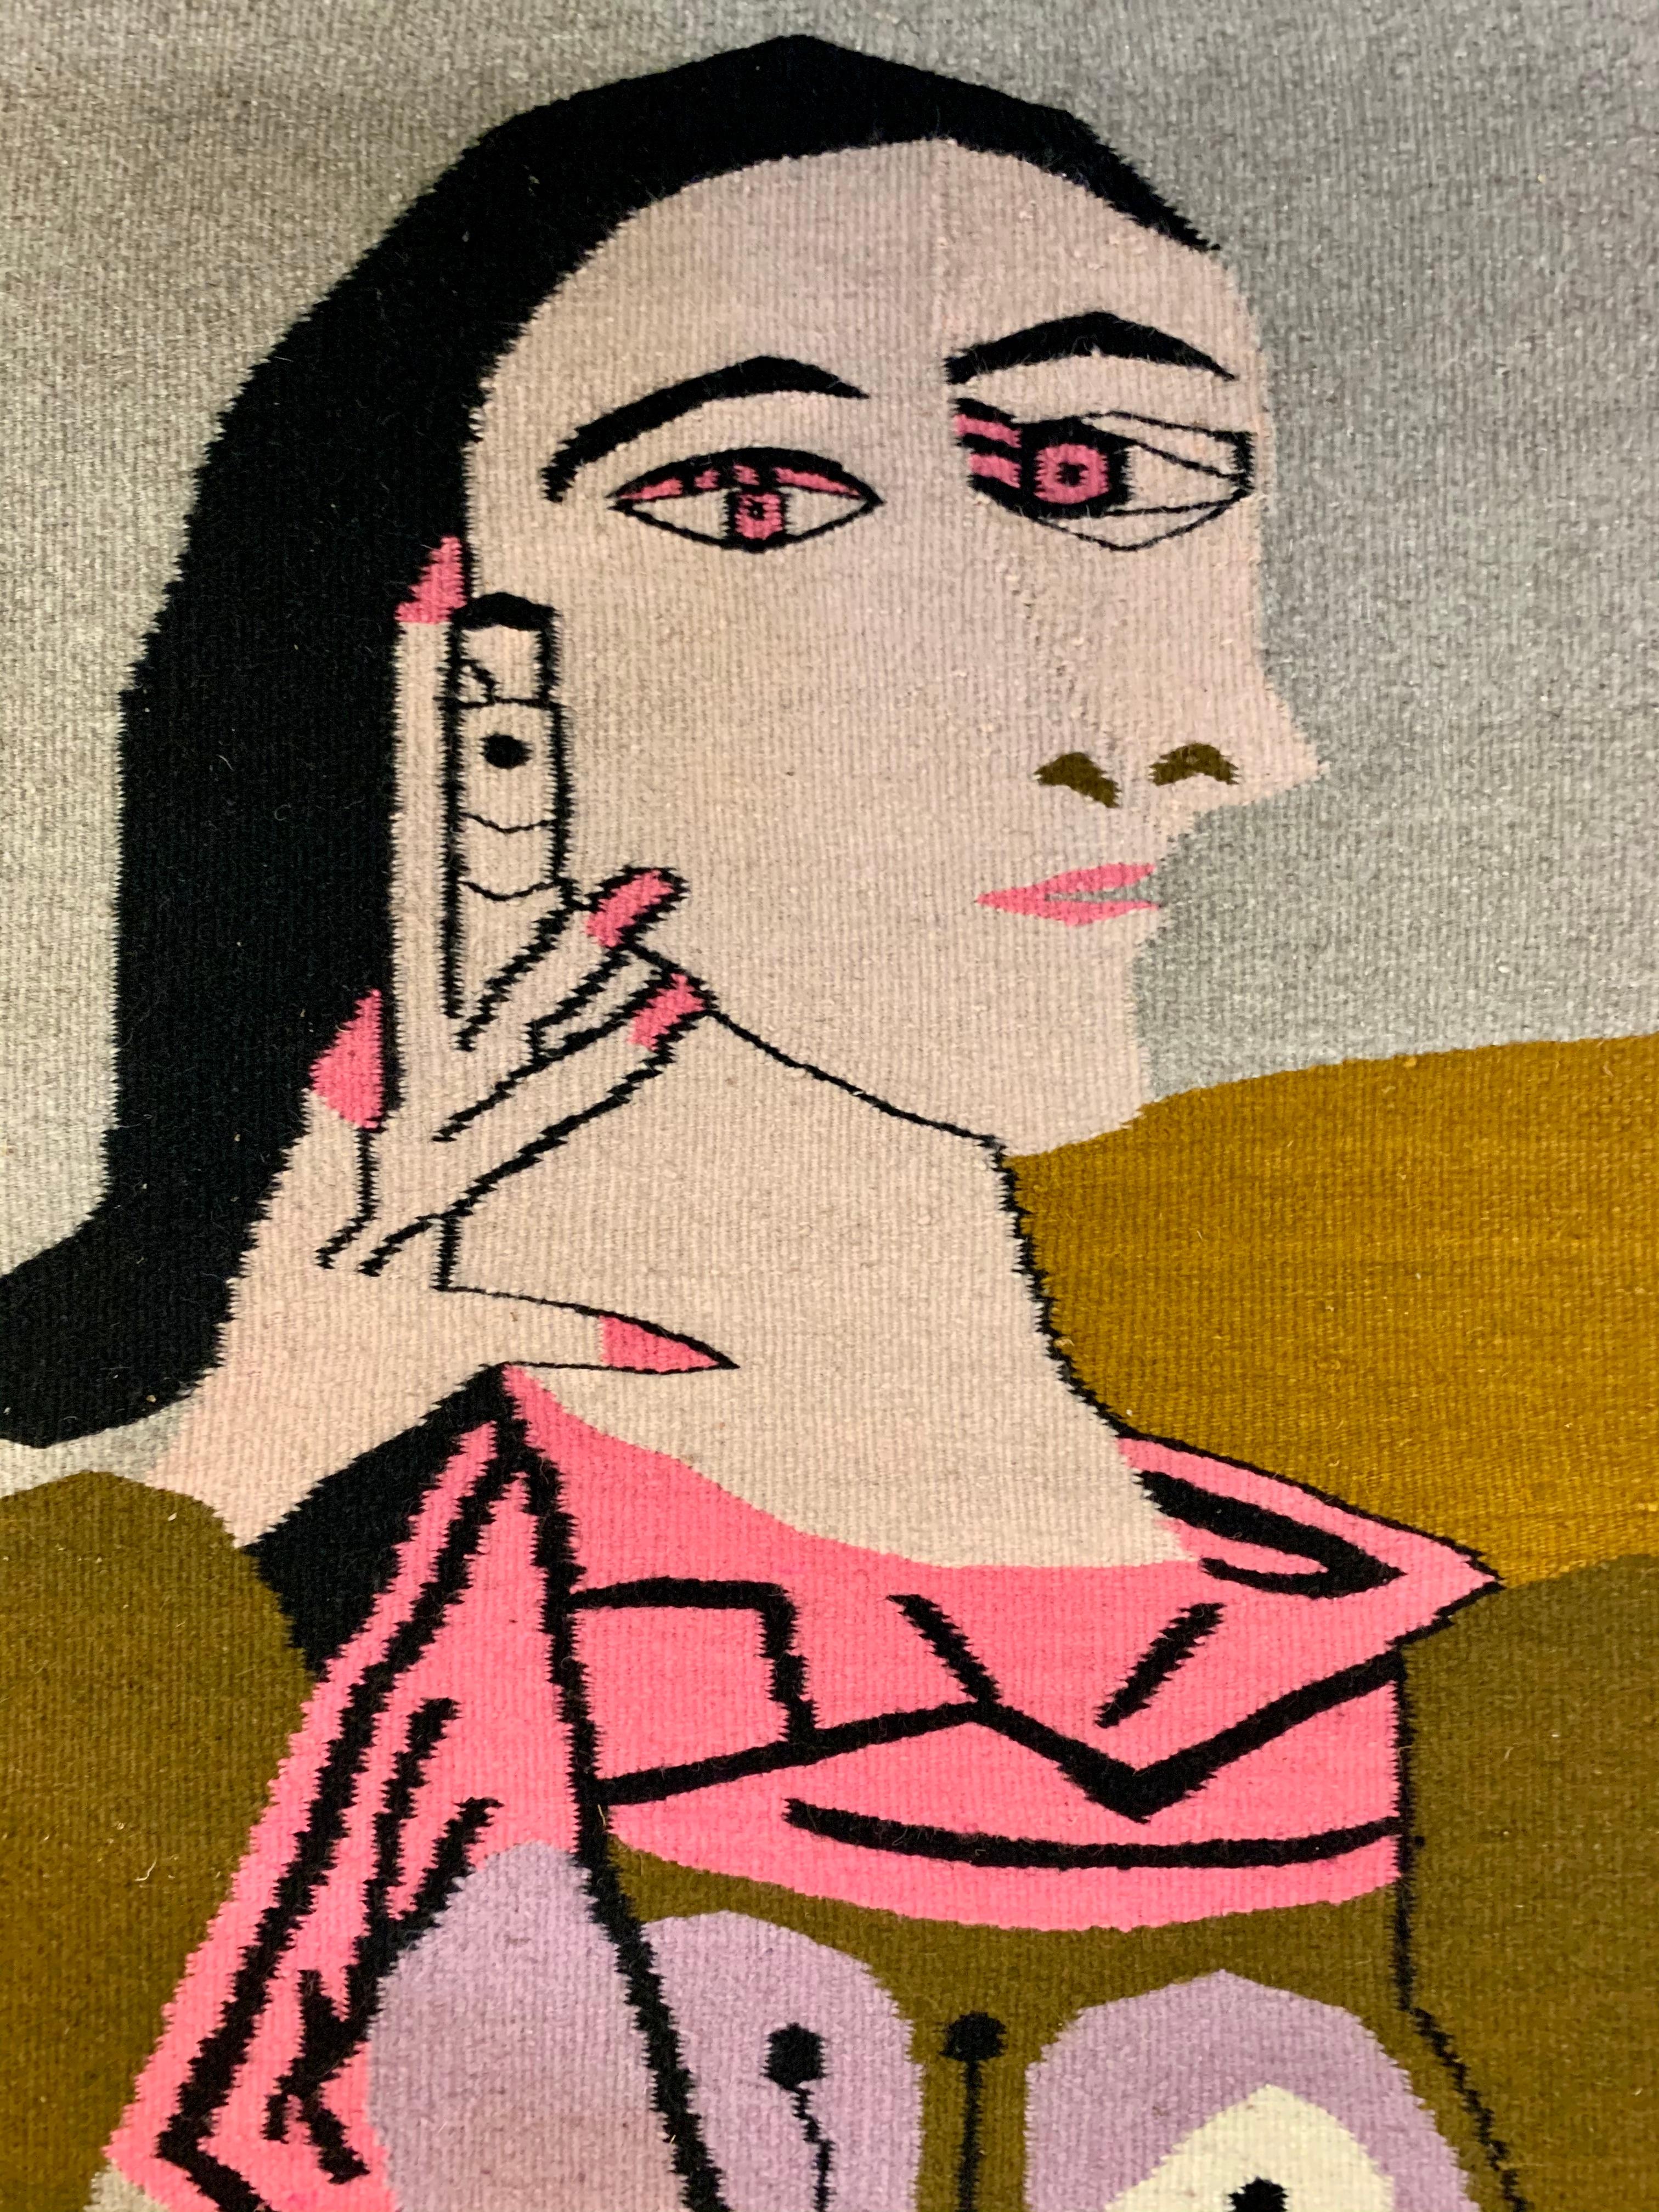 Magnificent after Picasso completely handstitched all wool tapestry portrait of a woman.
Rare and unusual. Now, more than ever, home is where the heart is.